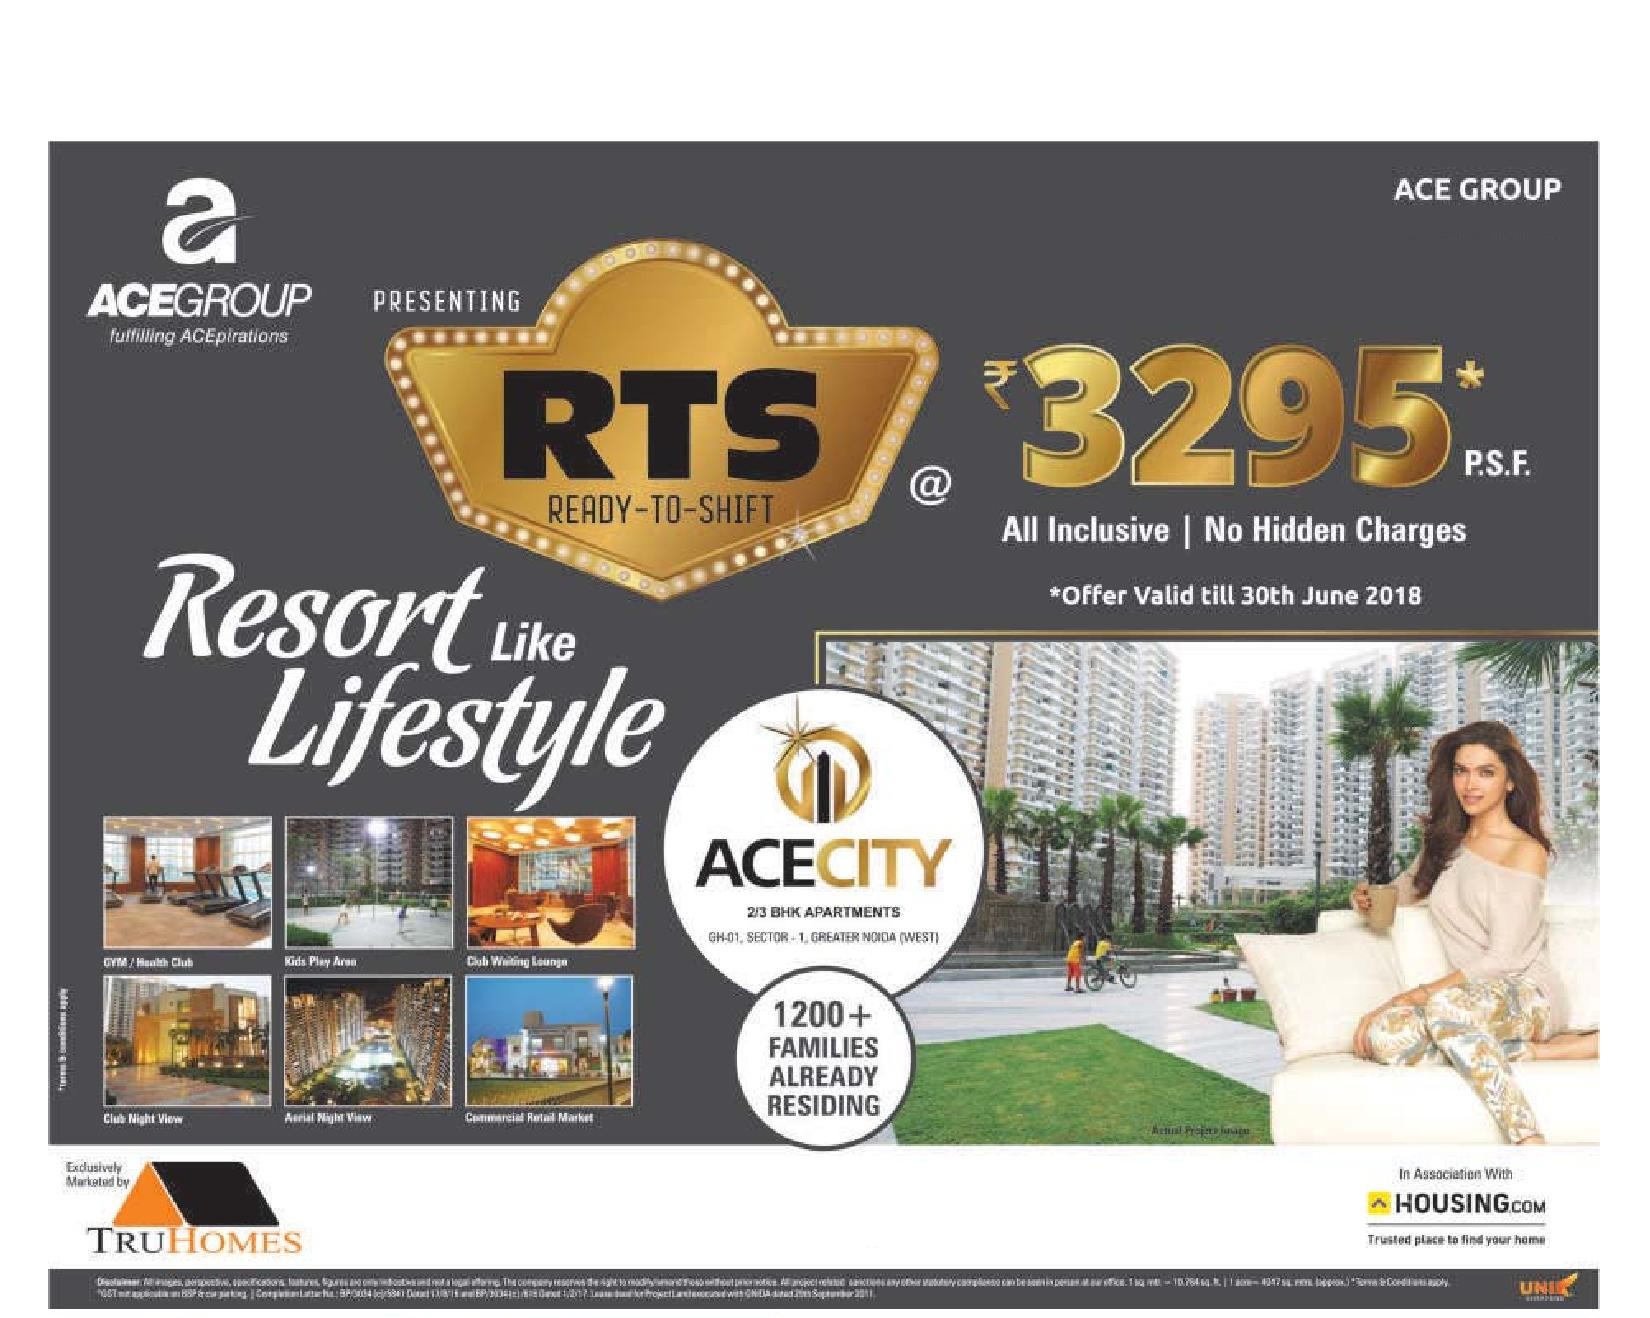 Pay just Rs. 3295 per sq.ft. at Ace City in Greater Noida